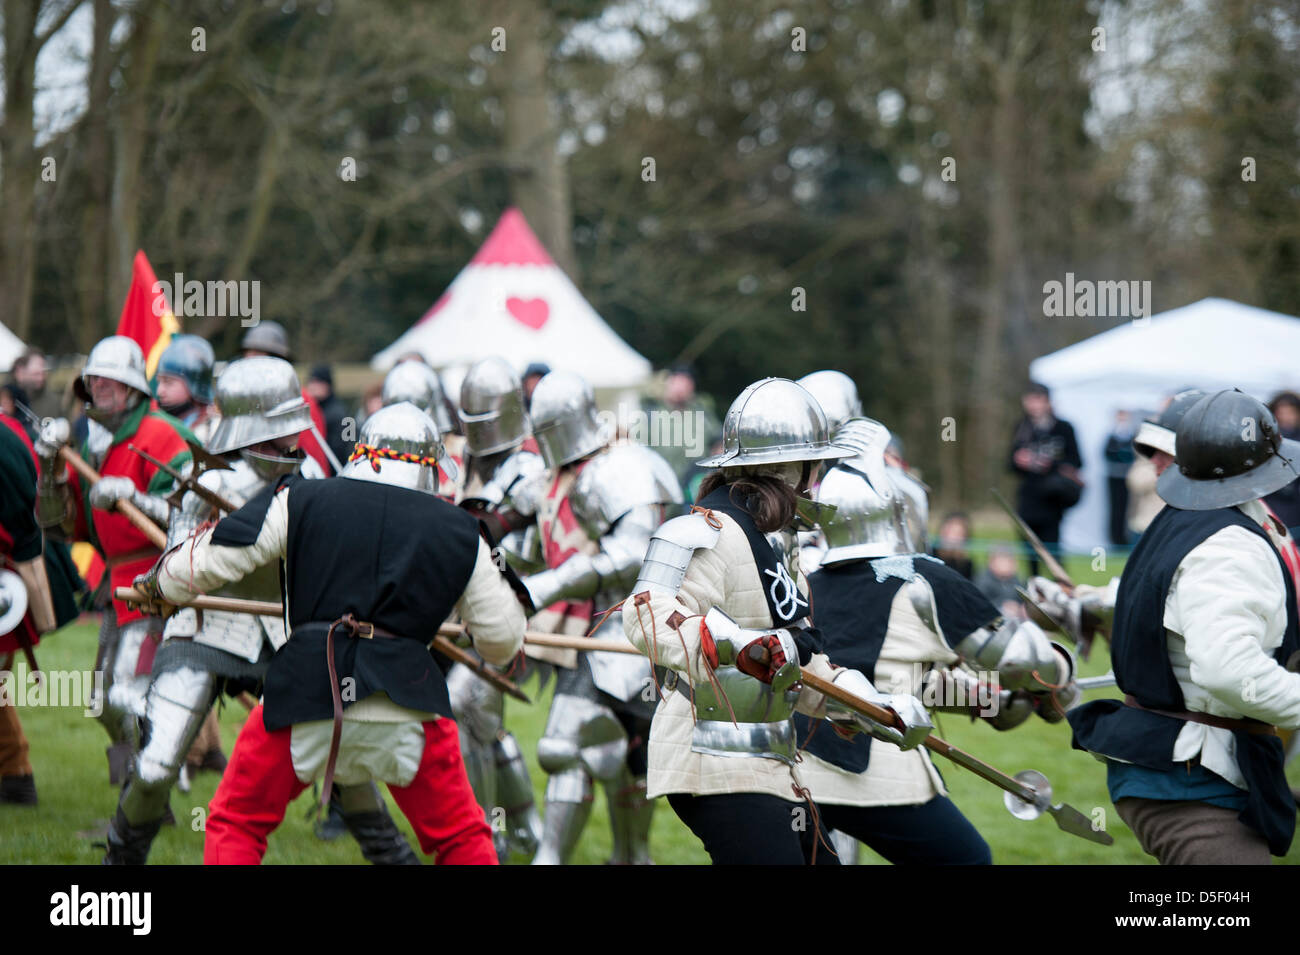 Medieval re-enactment battle at Hedingham Castle, on the Essex, Suffolk border in the UK. Stock Photo